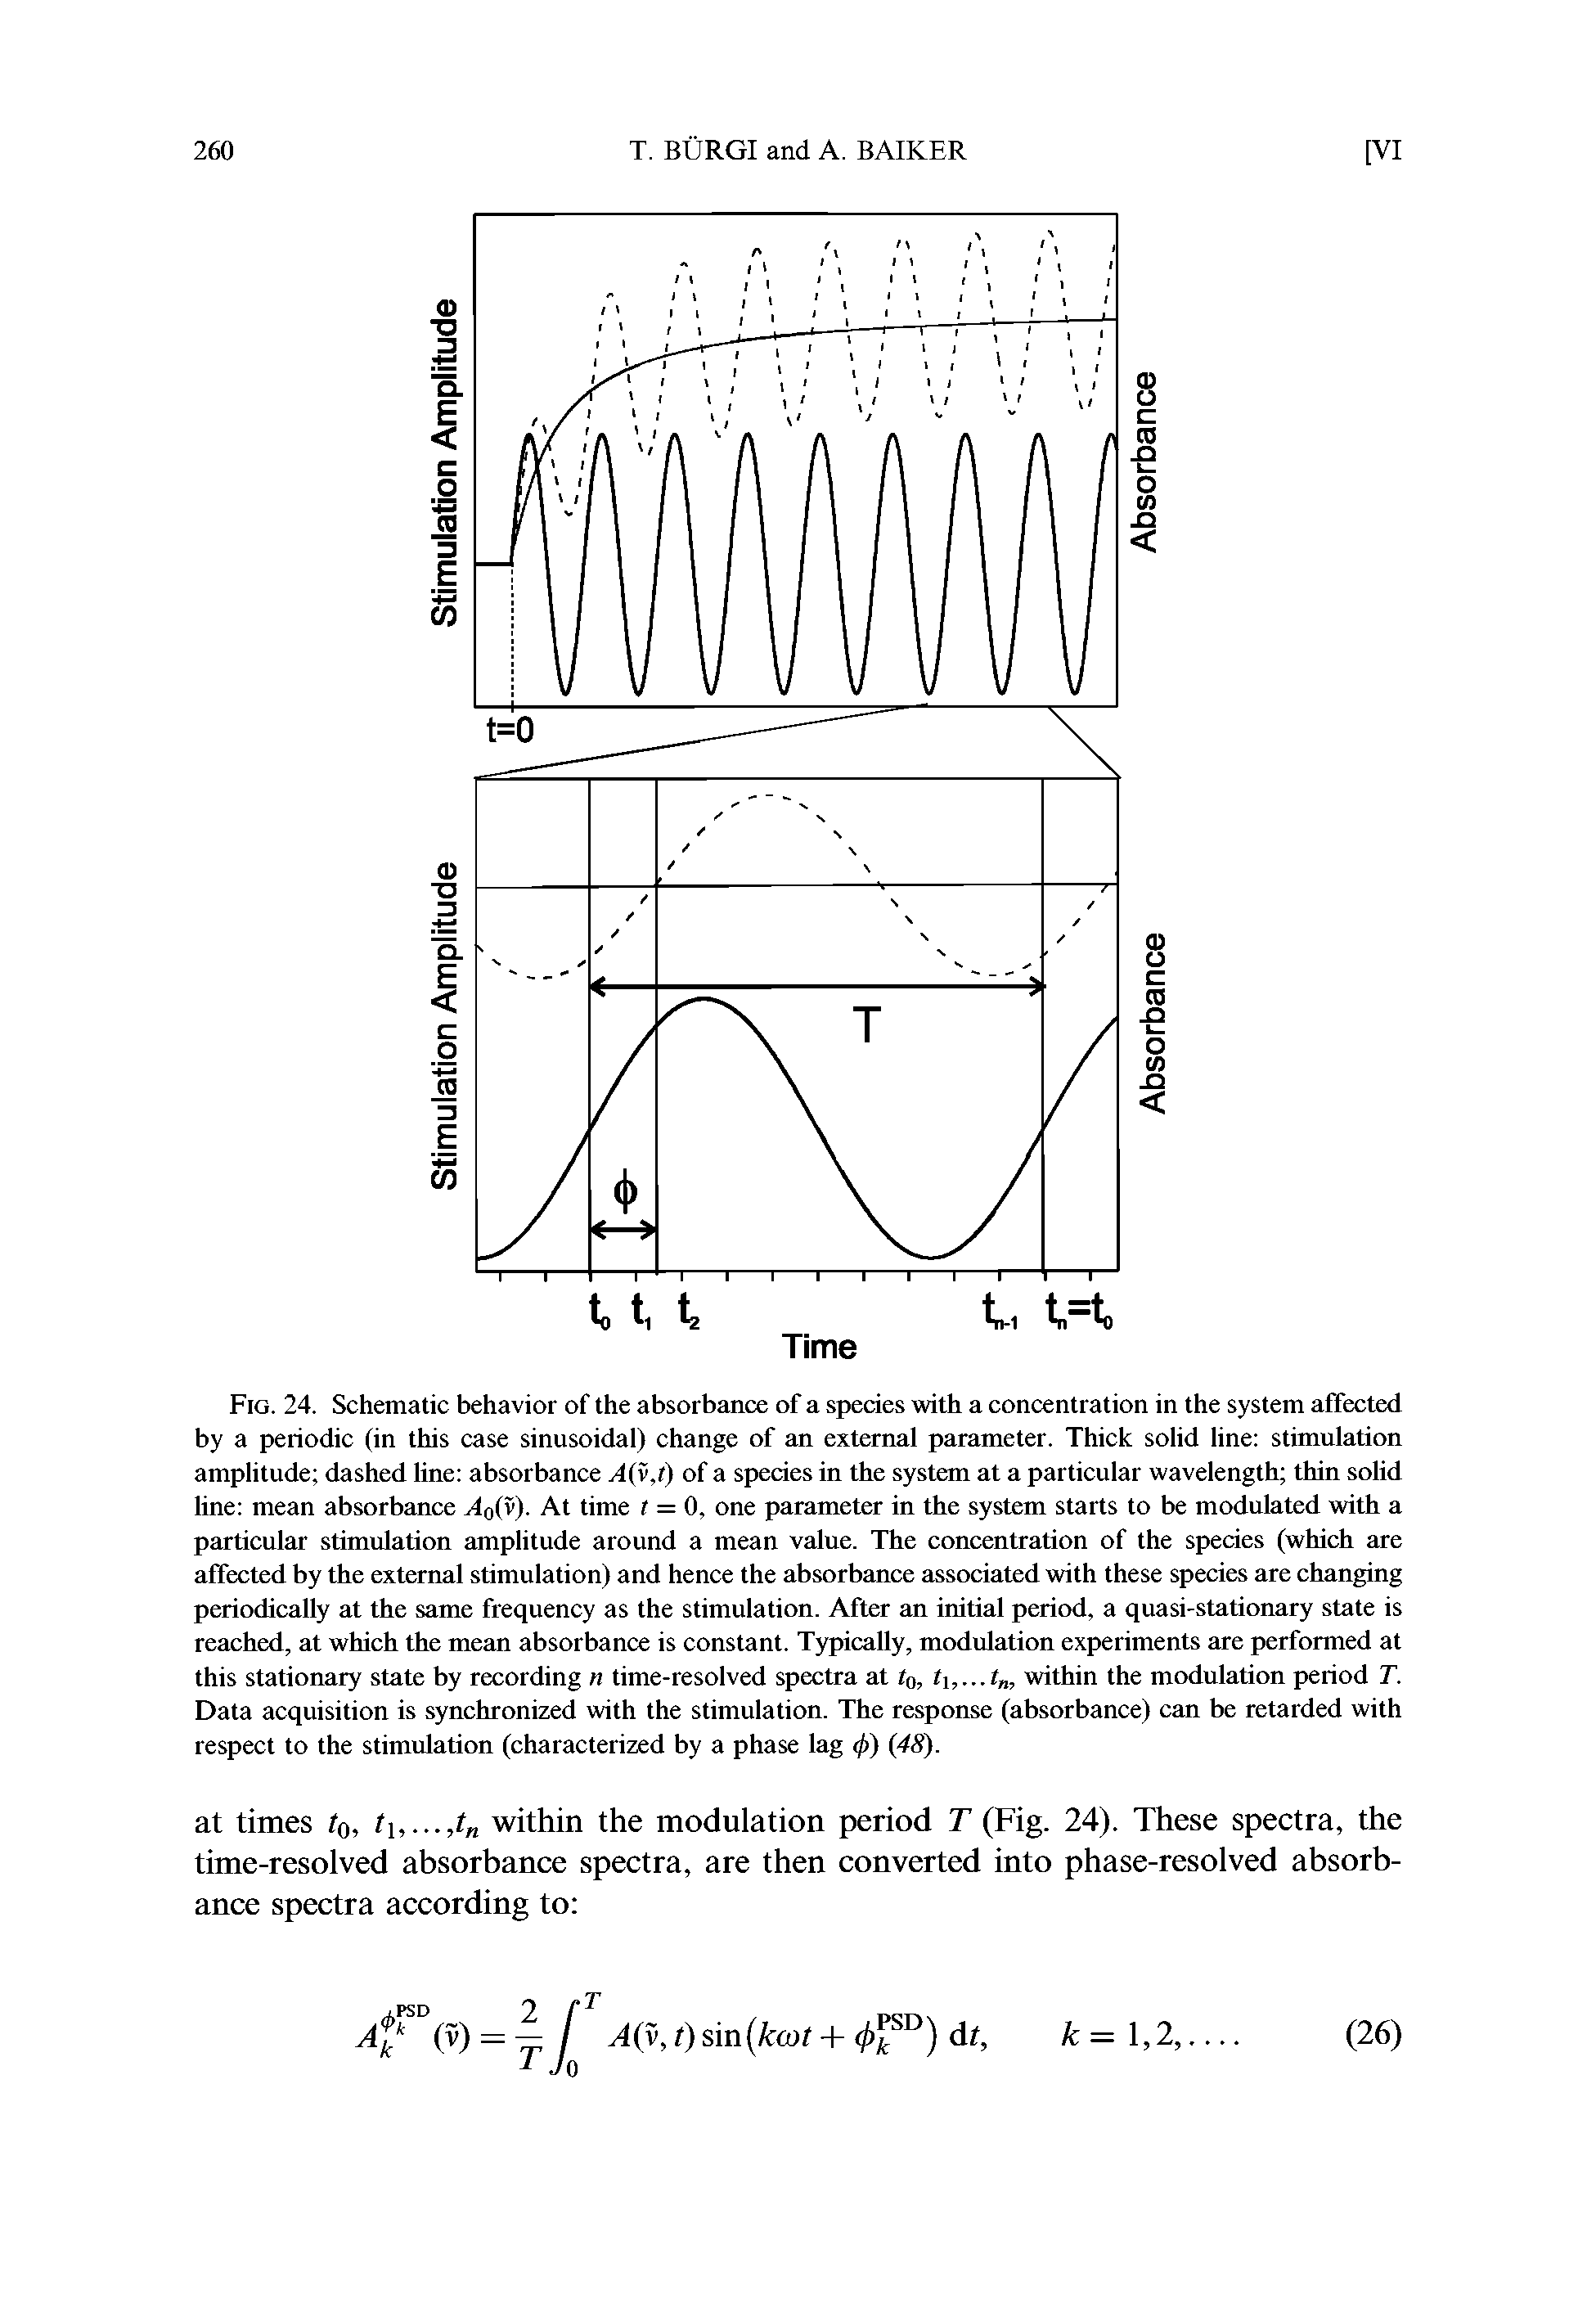 Fig. 24. Schematic behavior of the absorbance of a species with a concentration in the system affected by a periodic (in this case sinusoidal) change of an external parameter. Thick solid line stimulation amplitude dashed line absorbance A(v,t) of a species in the system at a particular wavelength thin solid line mean absorbance, 4o(T ). At time t = 0, one parameter in the system starts to be modulated with a particular stimulation amplitude around a mean value. The concentration of the species (which are affected by the external stimulation) and hence the absorbance associated with these species are changing periodically at the same frequency as the stimulation. After an initial period, a quasi-stationary state is reached, at which the mean absorbance is constant. Typically, modulation experiments are performed at this stationary state by recording n time-resolved spectra at to, within the modulation period T.